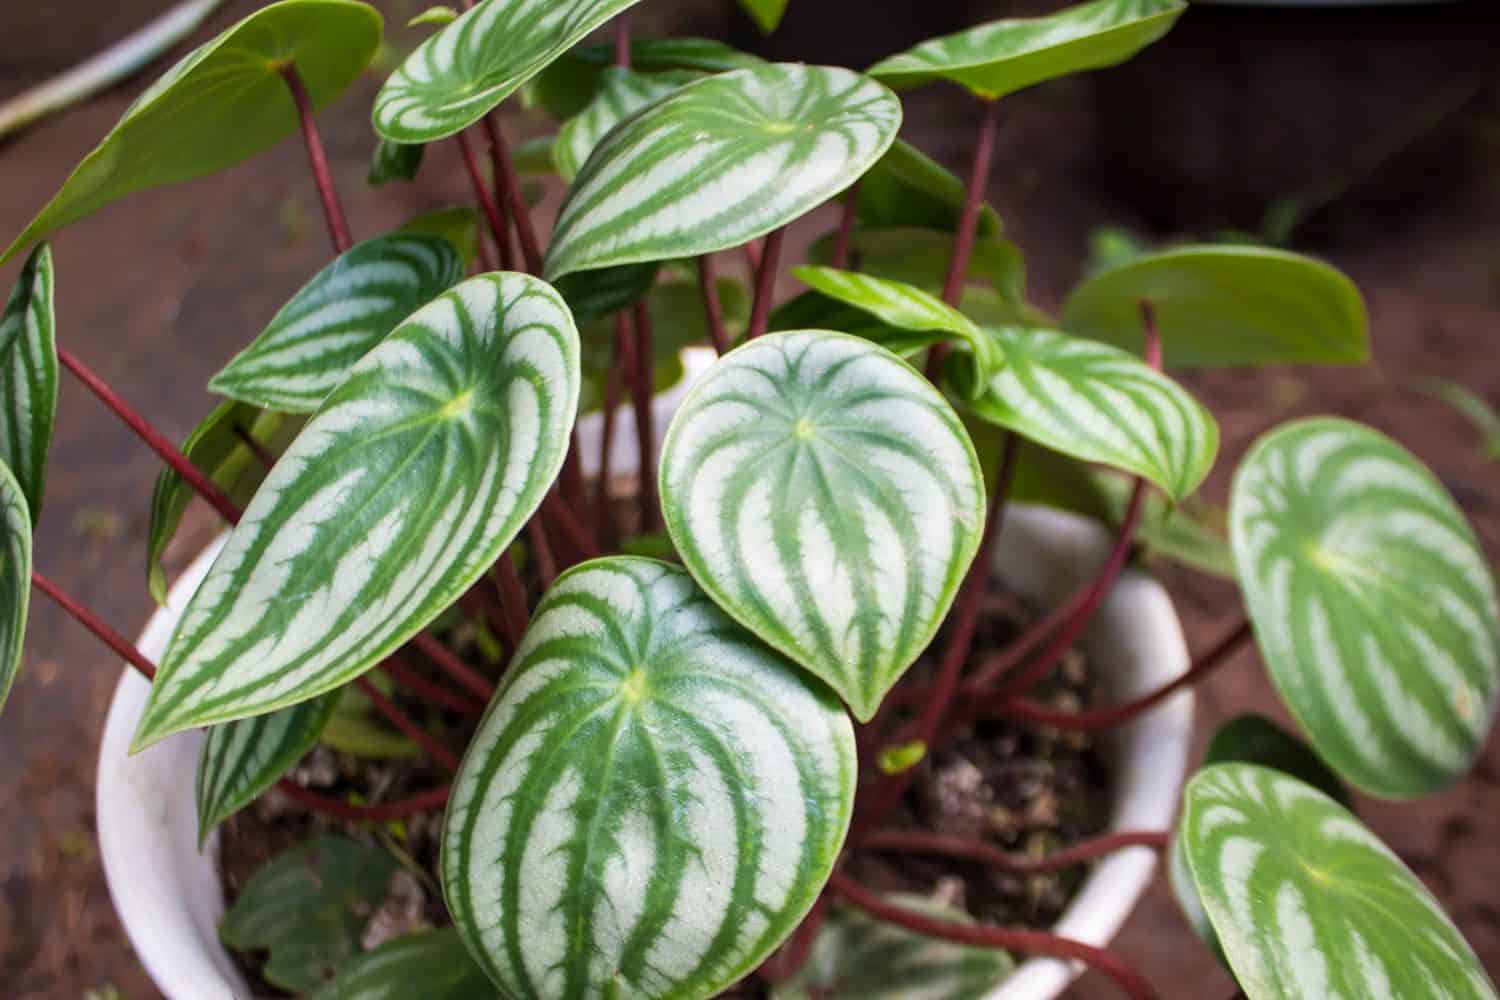 Peperomia watermelon leaves look clean and fresh